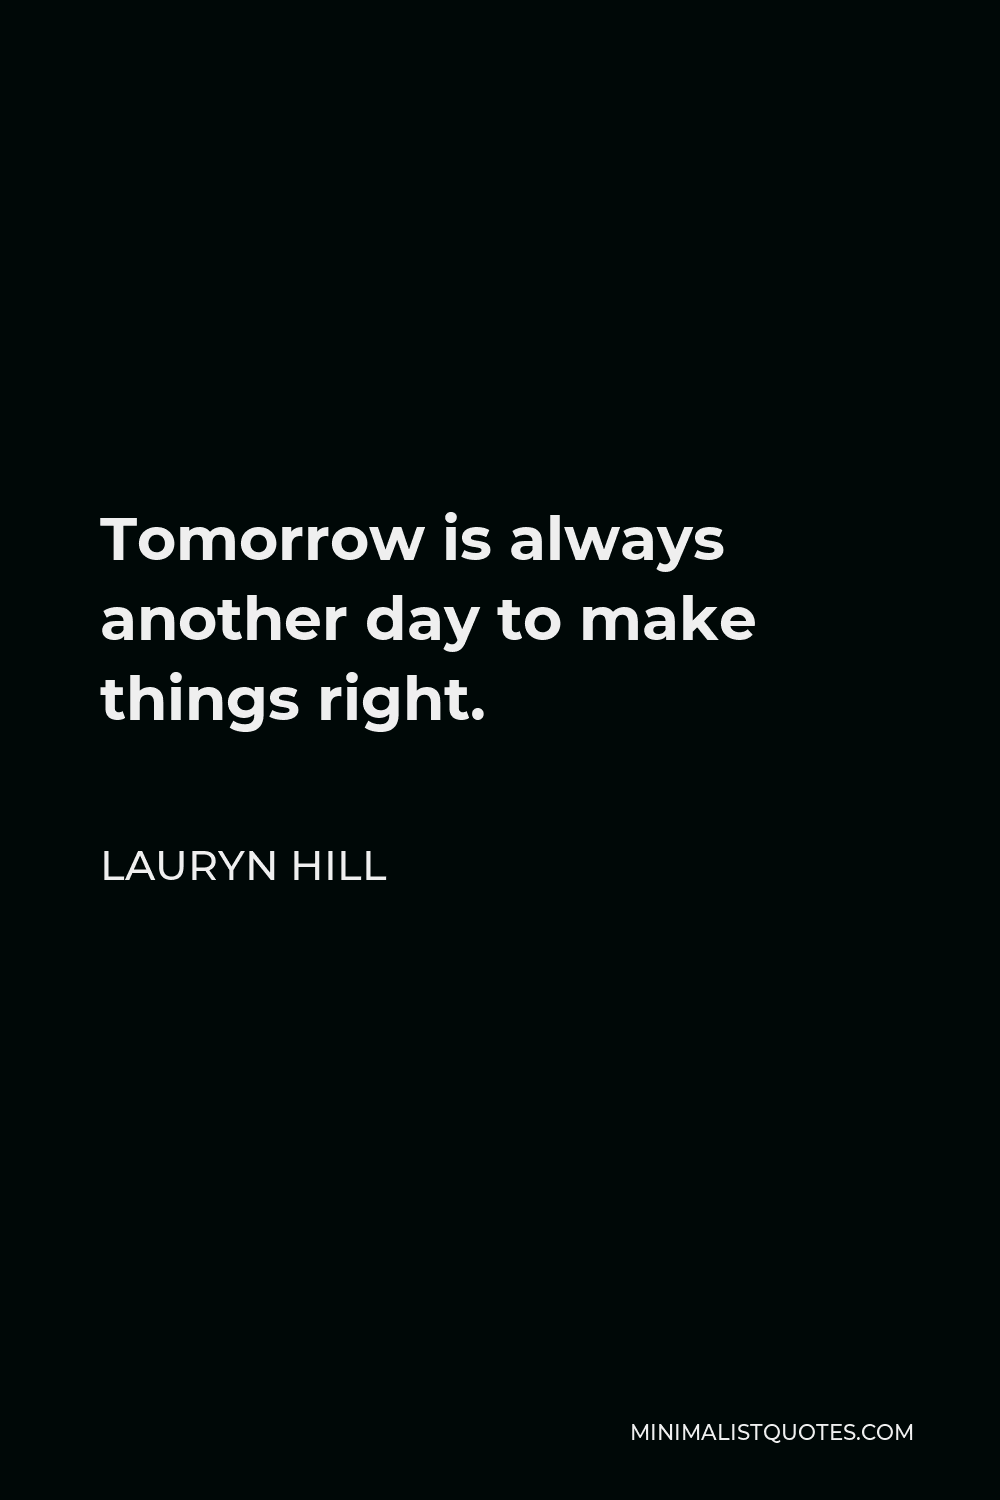 Lauryn Hill Quote - Tomorrow is always another day to make things right.